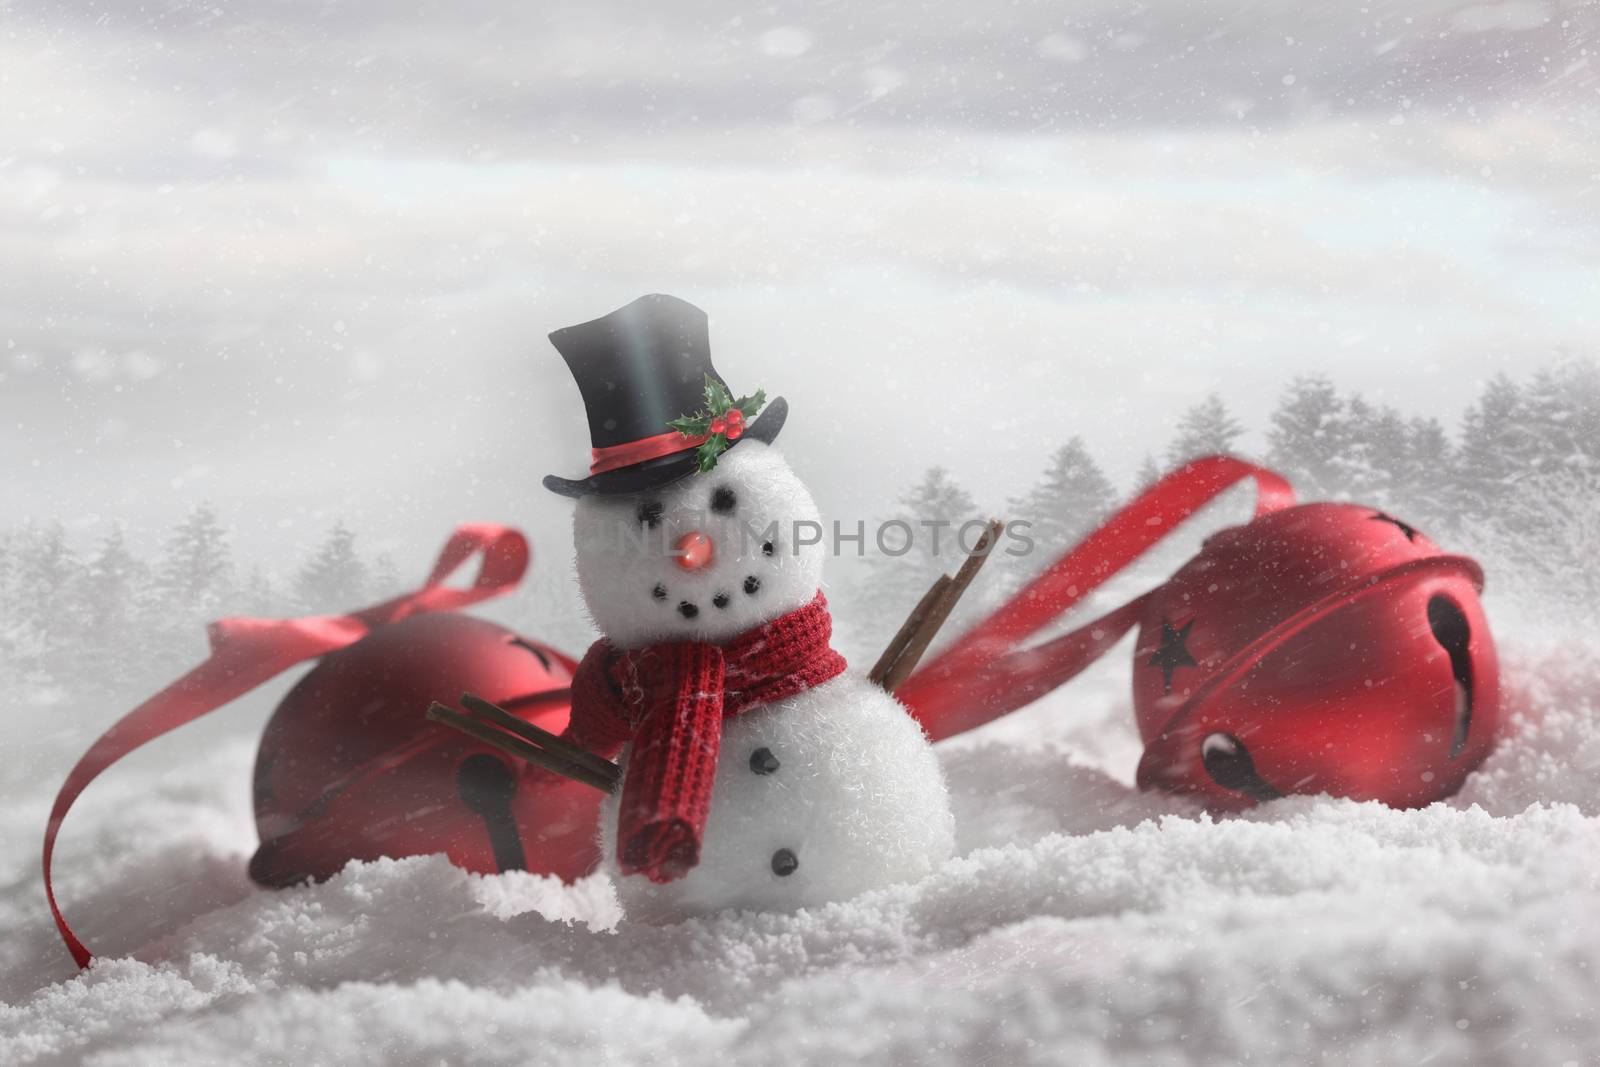 Snowman with bells in snowy background by Sandralise